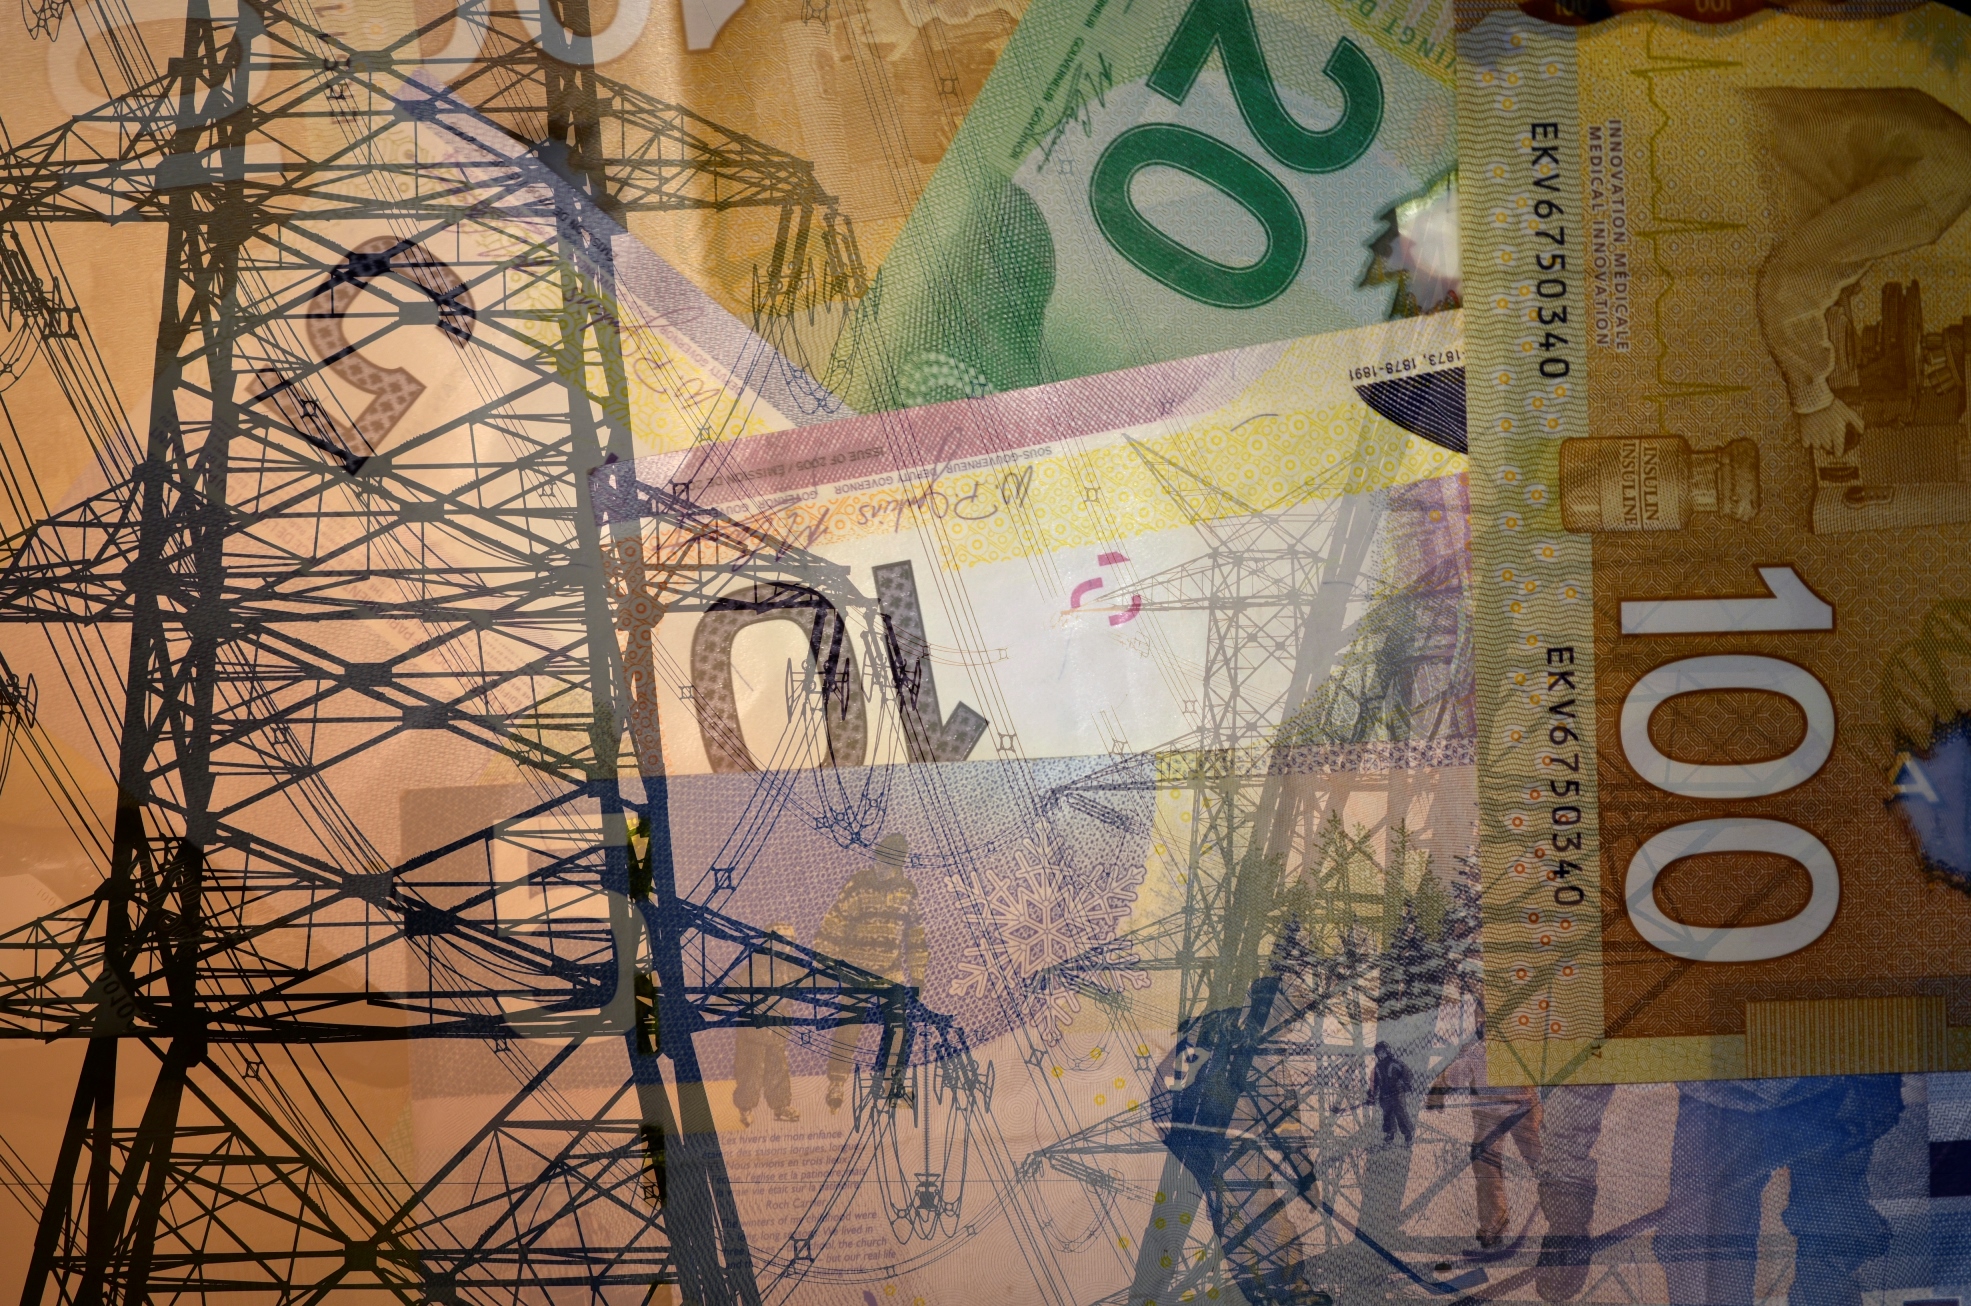 ONTARIO EXTENDS FLAT-RATE ELECTRICITY PRICING